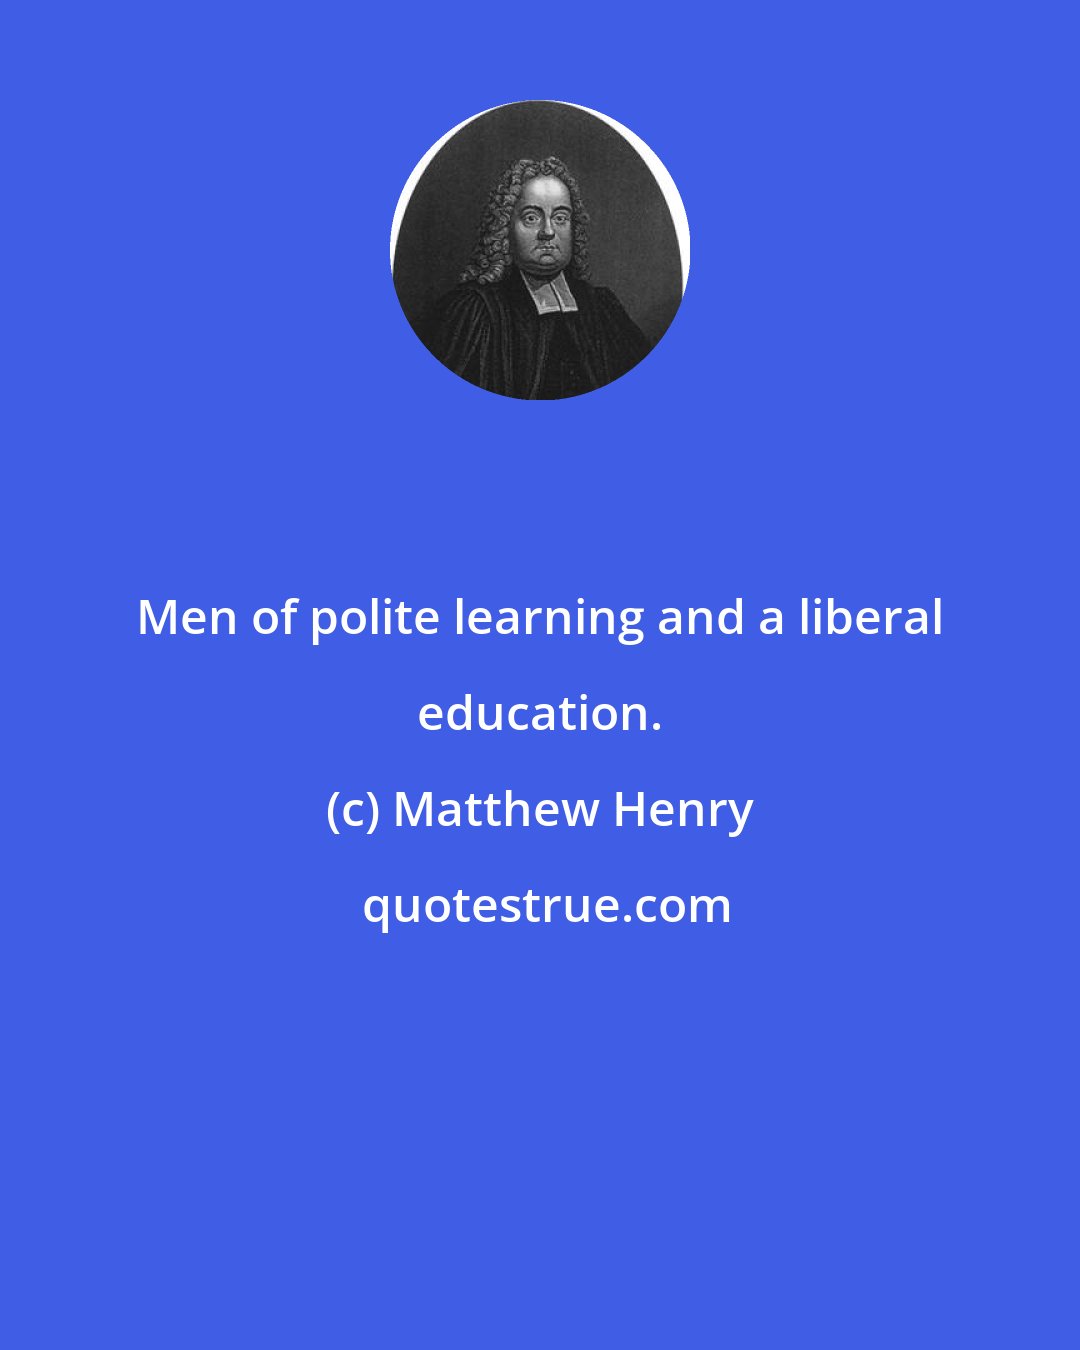 Matthew Henry: Men of polite learning and a liberal education.